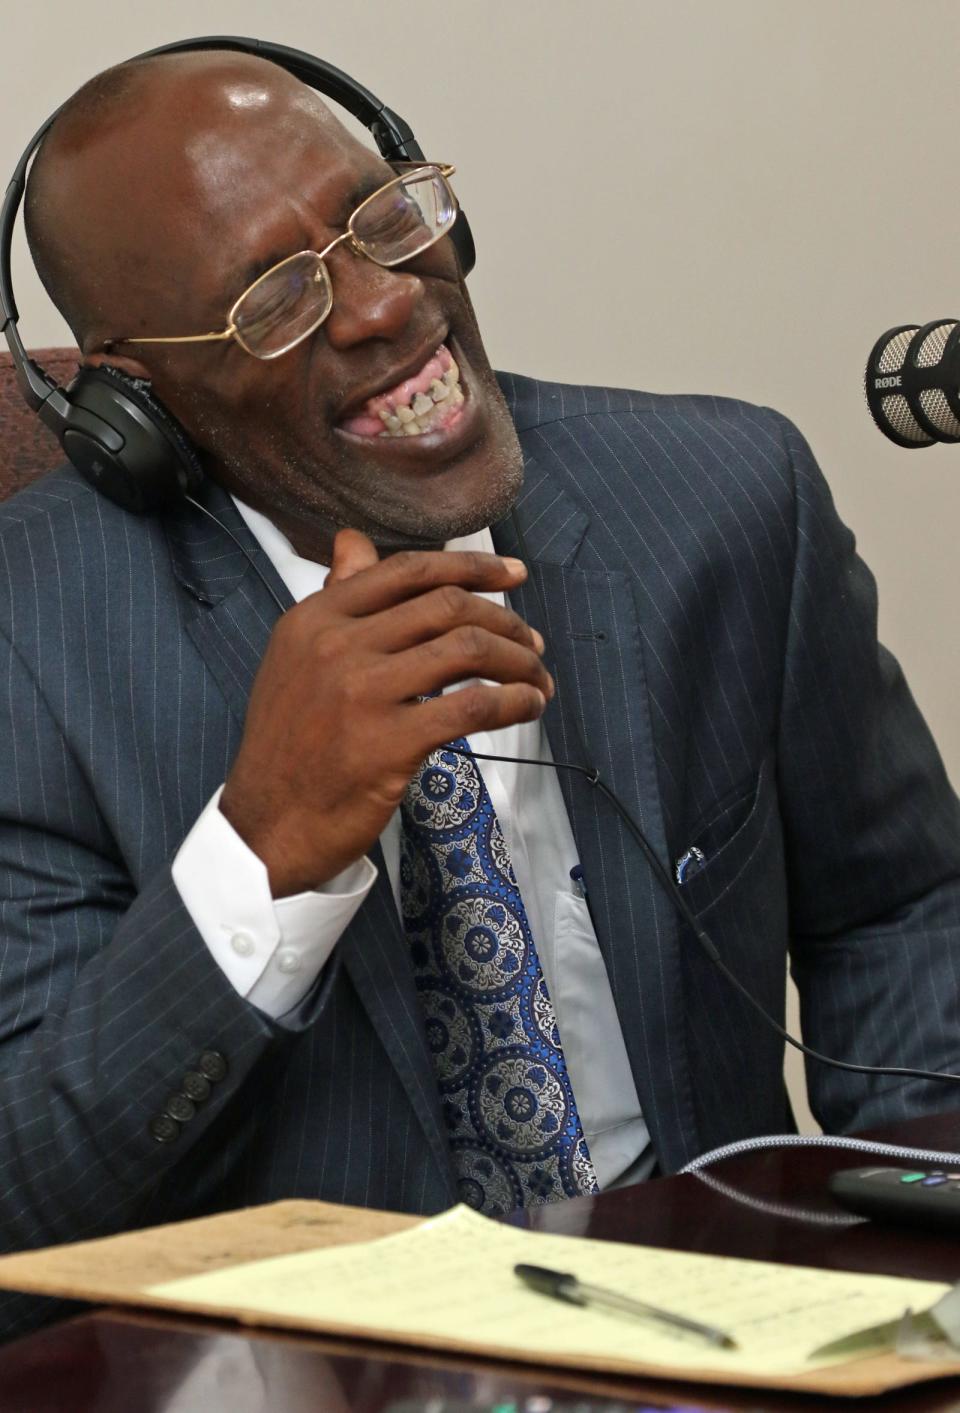 Jimmy Hall laughs while recording his interview with local members of the community during his “We Promote Community Success” podcast Tuesday morning, Feb. 28, 2023, at his studio in Shelby.